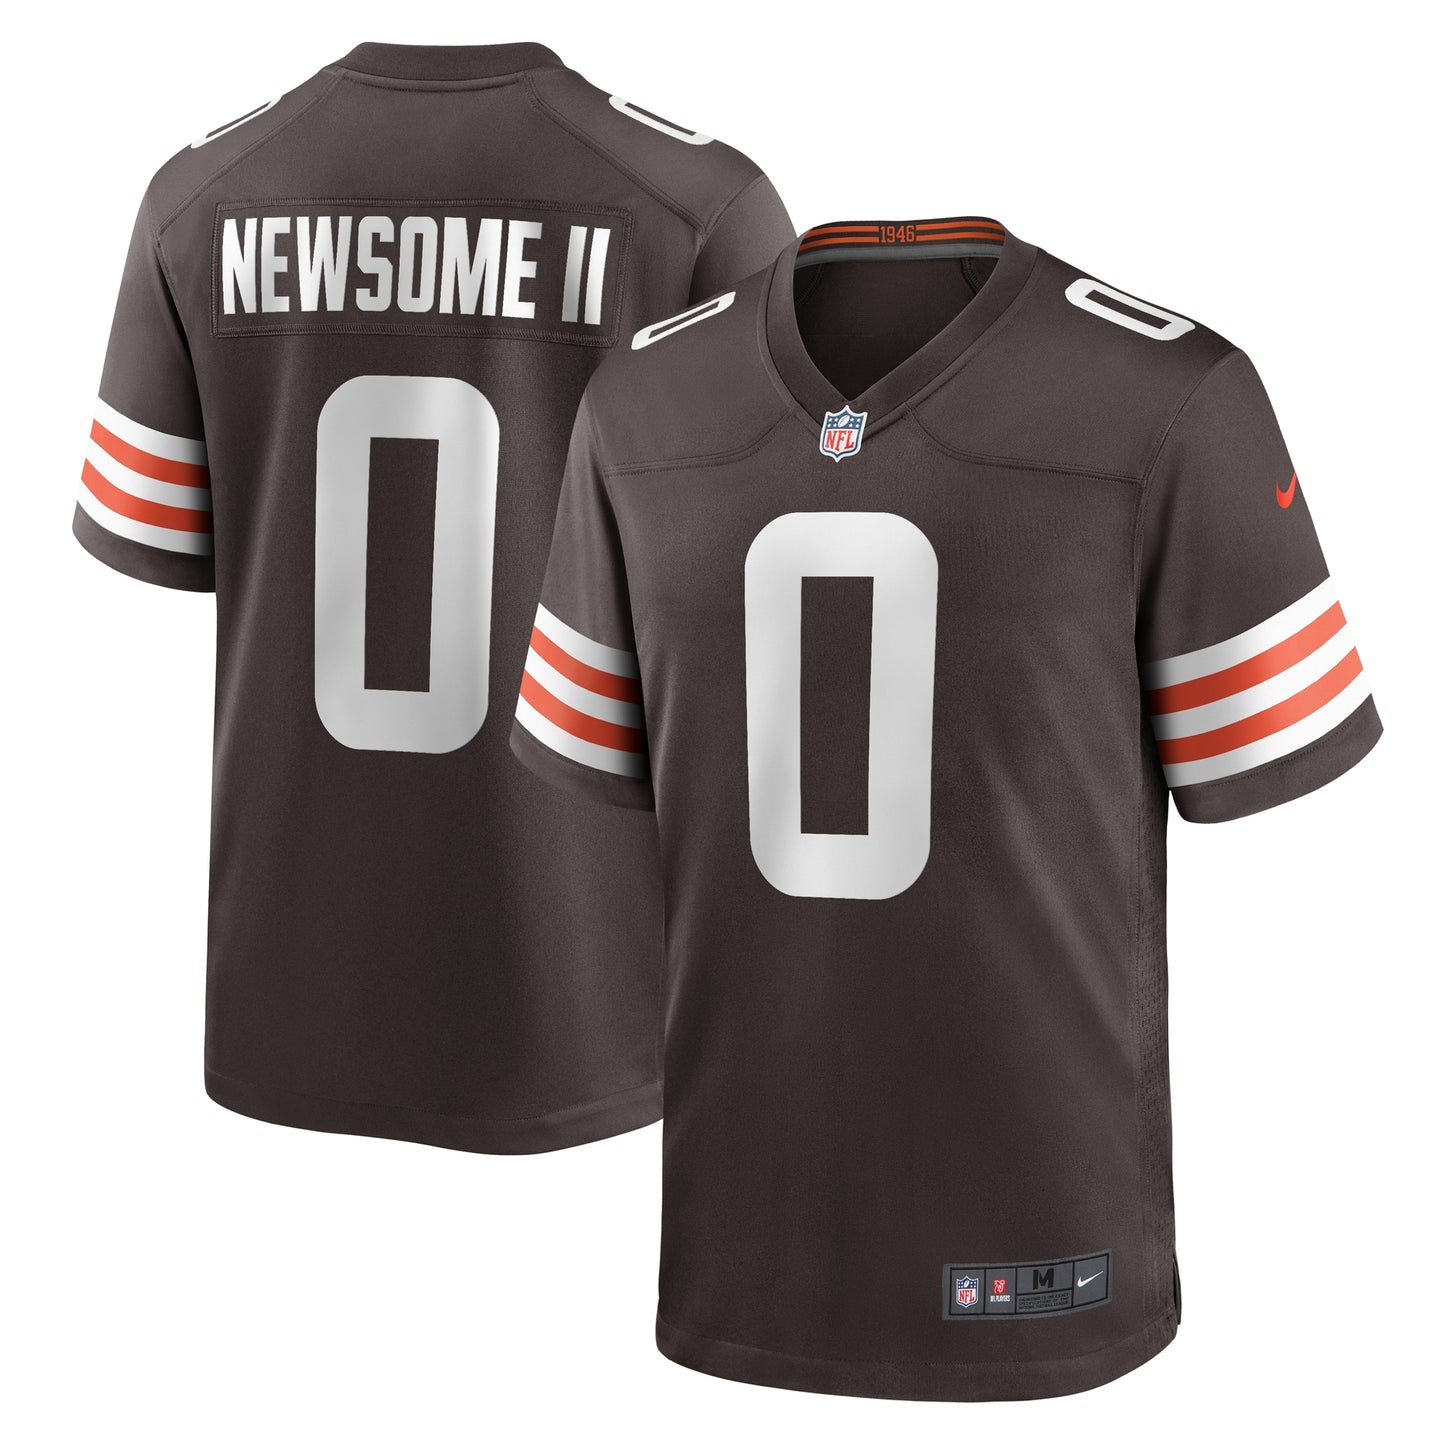 Greg Newsome II Cleveland Browns Nike Team Game Jersey - Brown